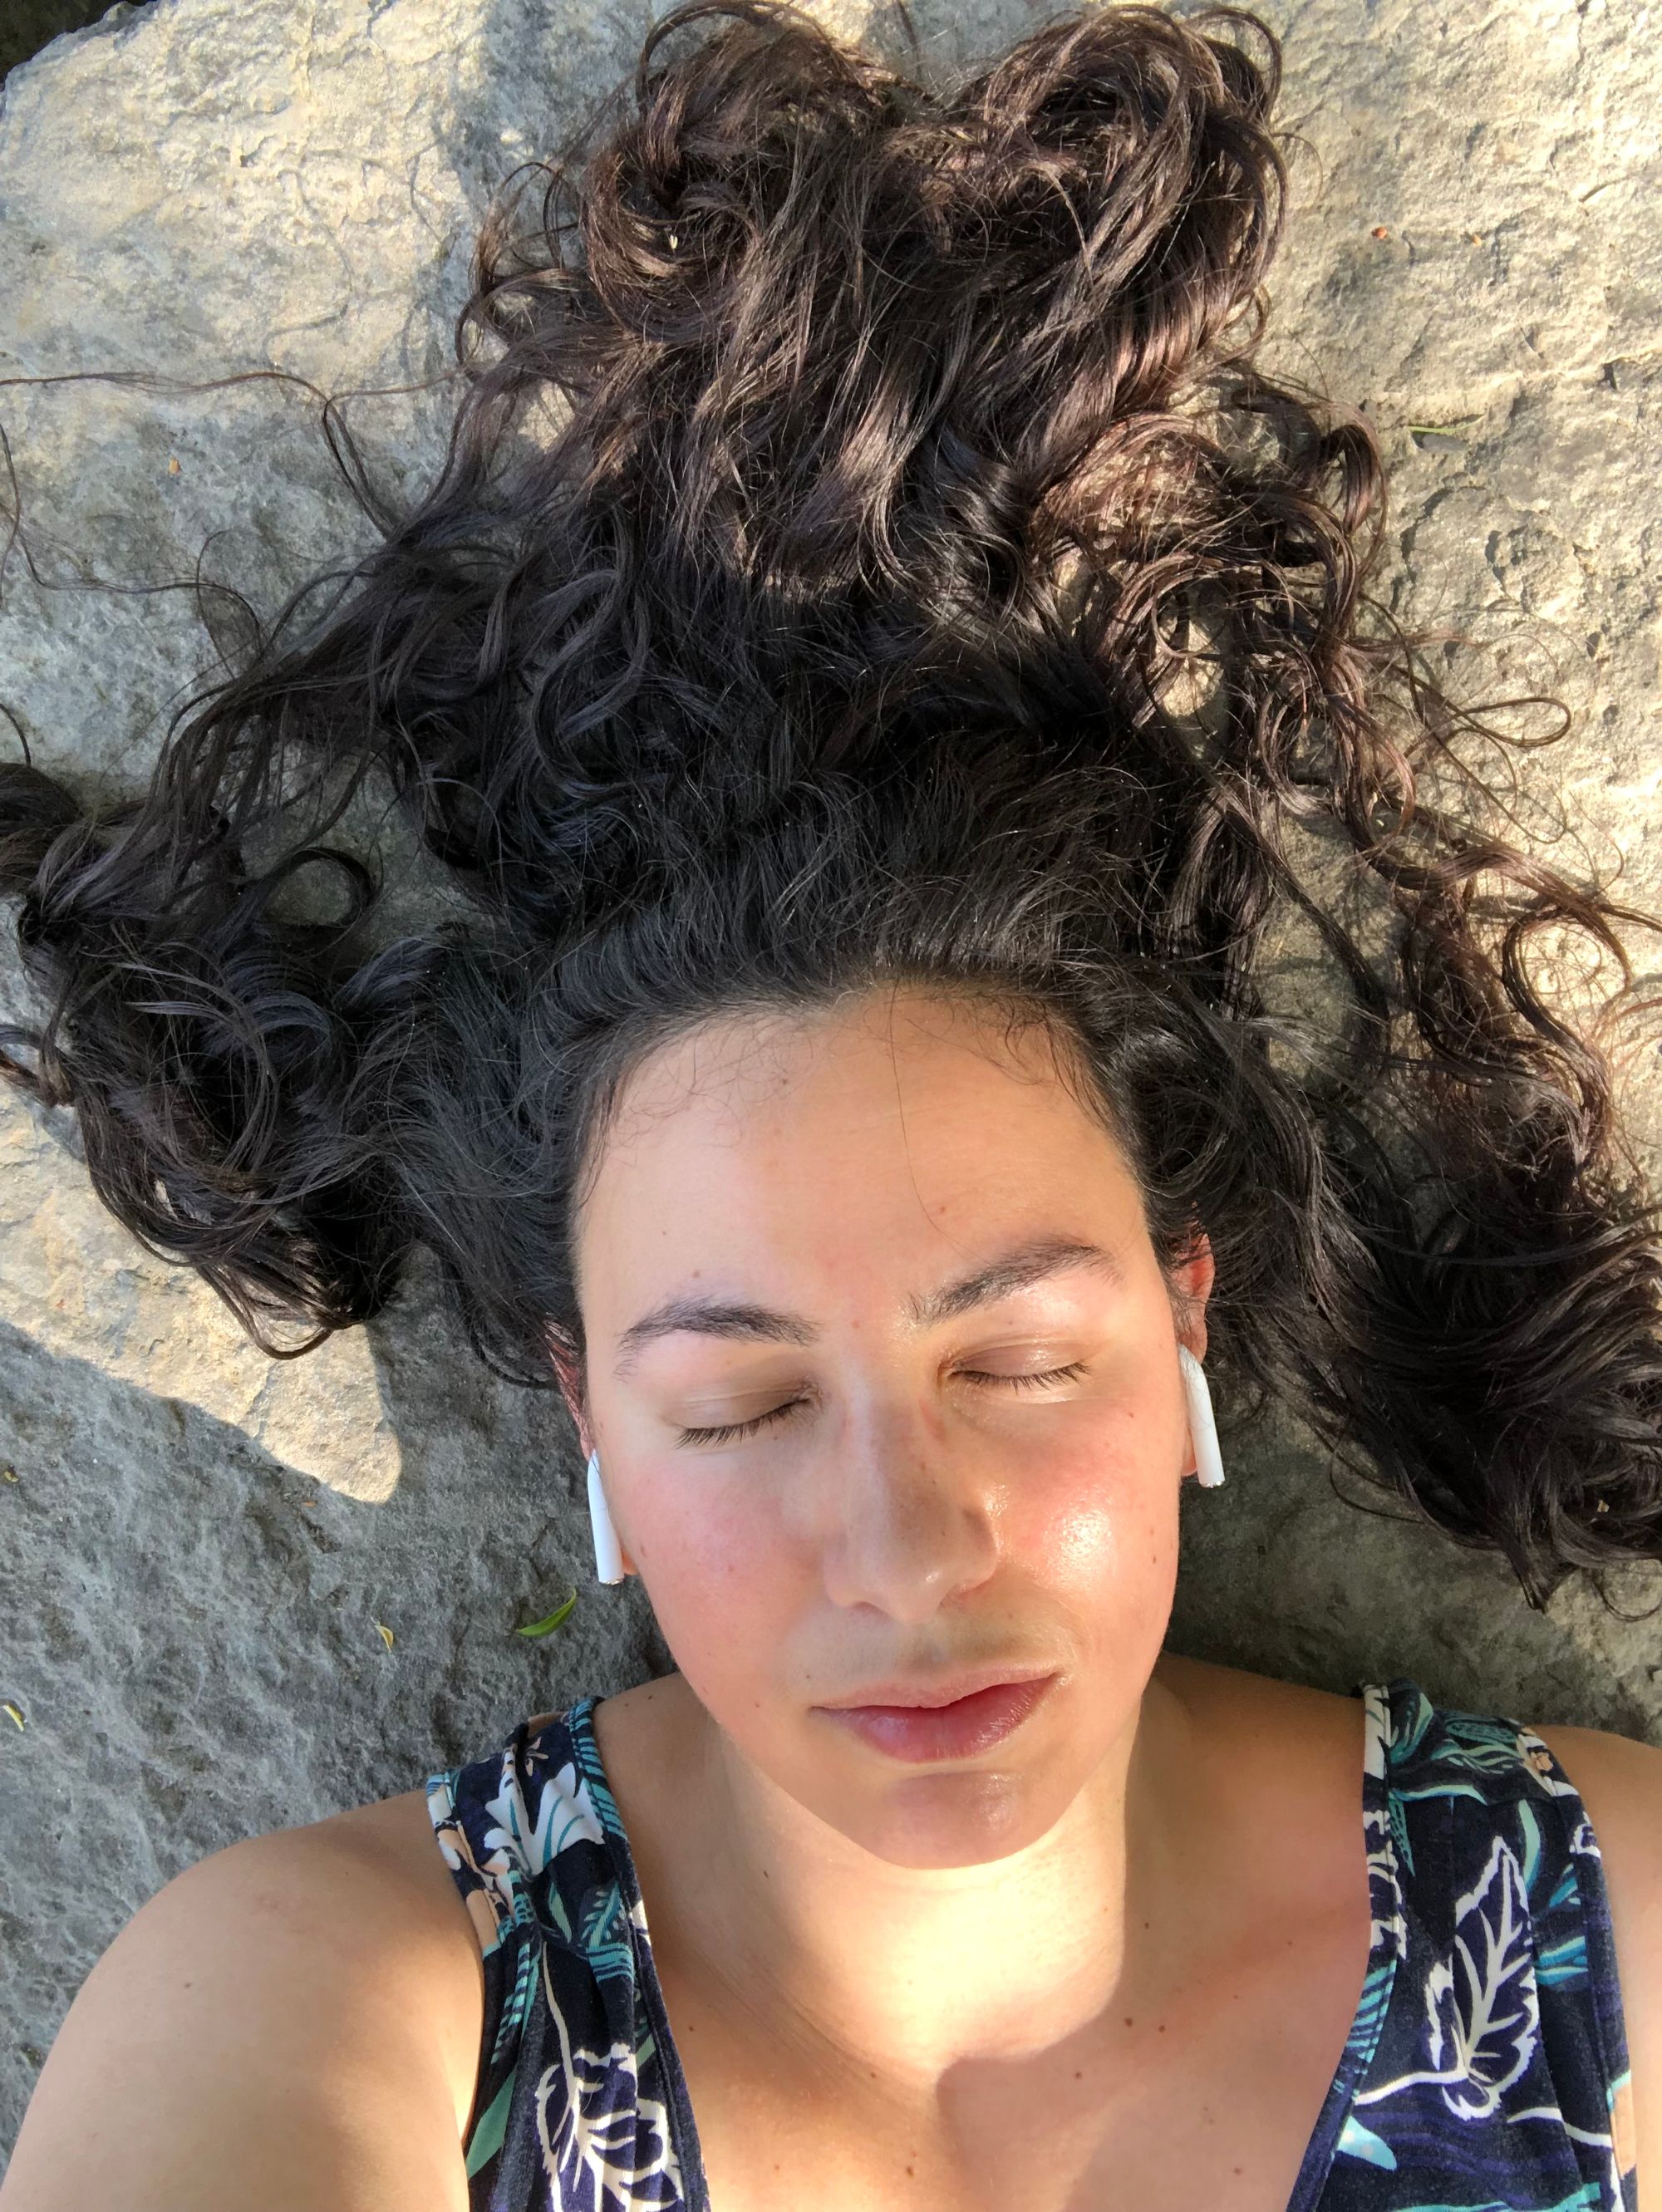 angled from above my face, a photo of me lying against grey stone with my eyes closed, my very long dark hair in wild snaking coils around my head, dappled sunlight at my throat. Wireless headphones are visible in my ears.